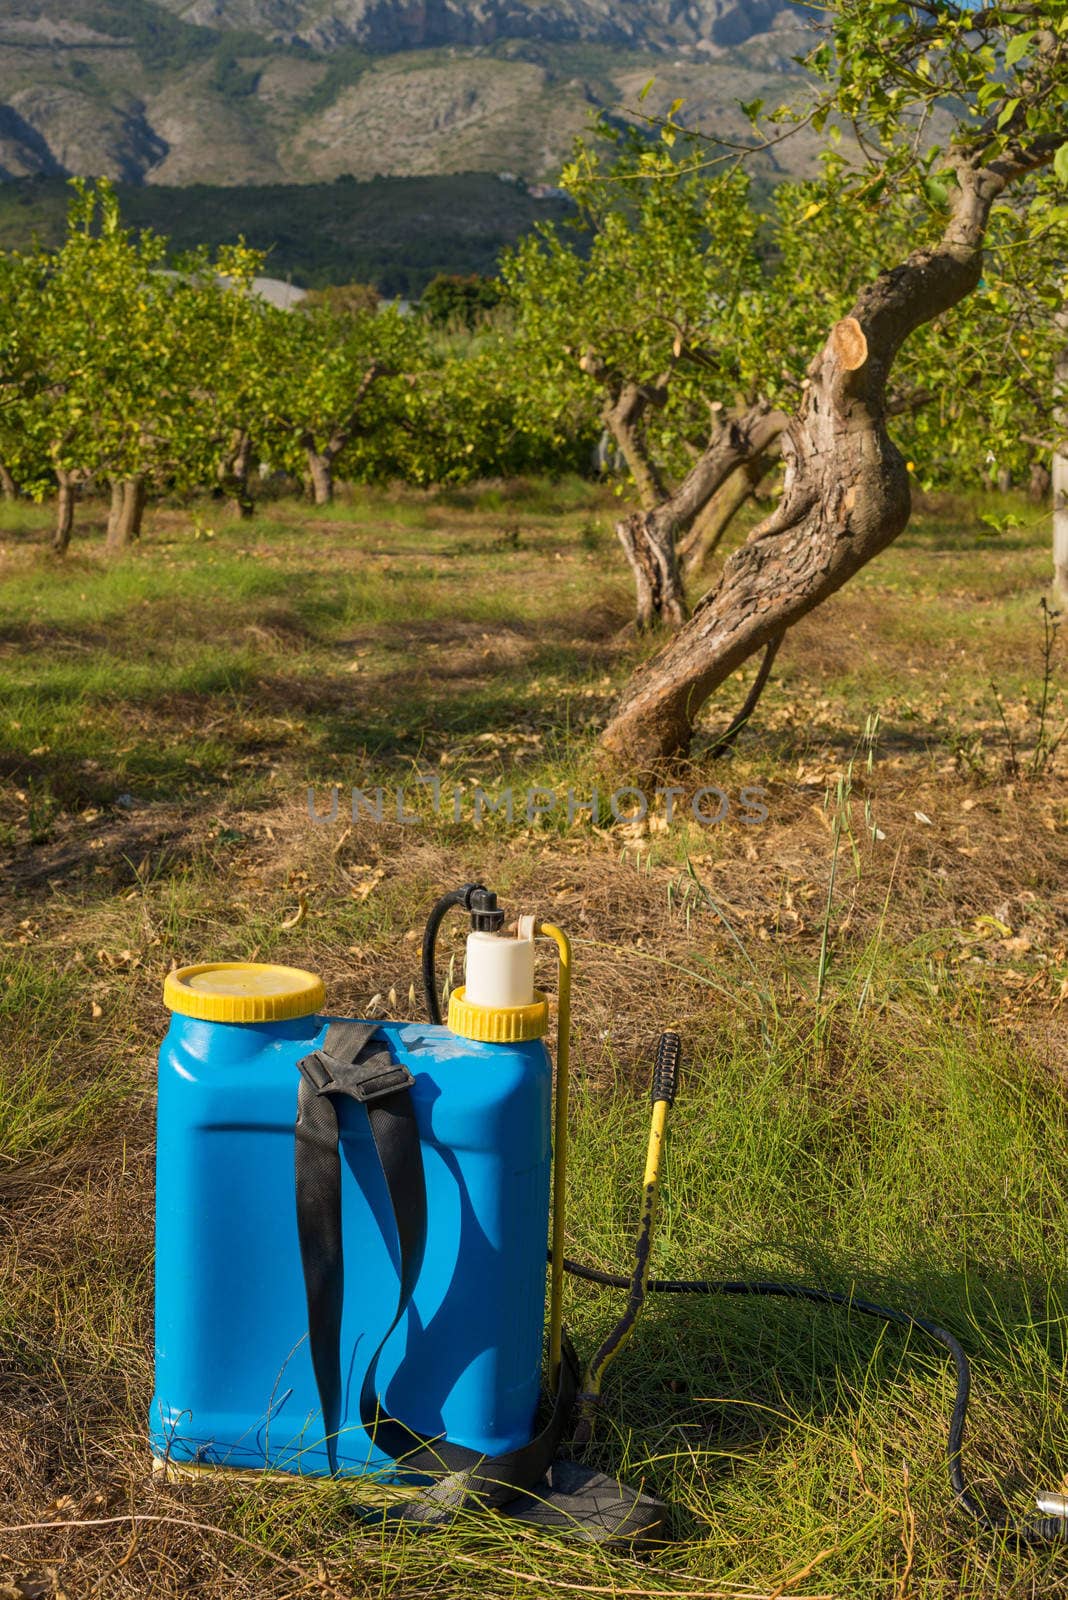 Pesticide sprayer against the background of an orchard